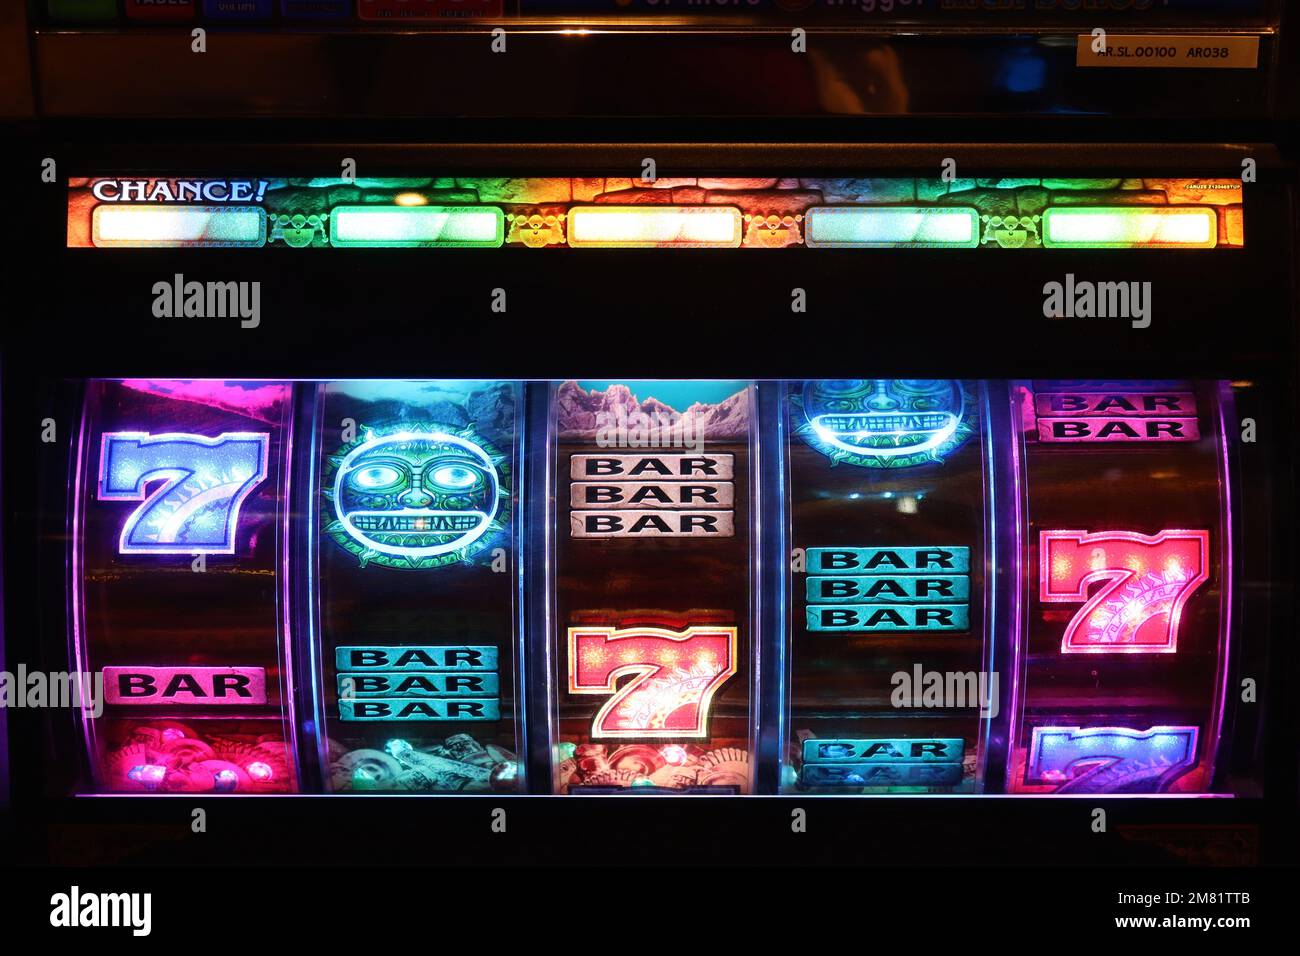 Illuminated slot machine wheels attract players with their colourful graphics and flashing sequences in dimly lit amusement arcacdes. Stock Photo